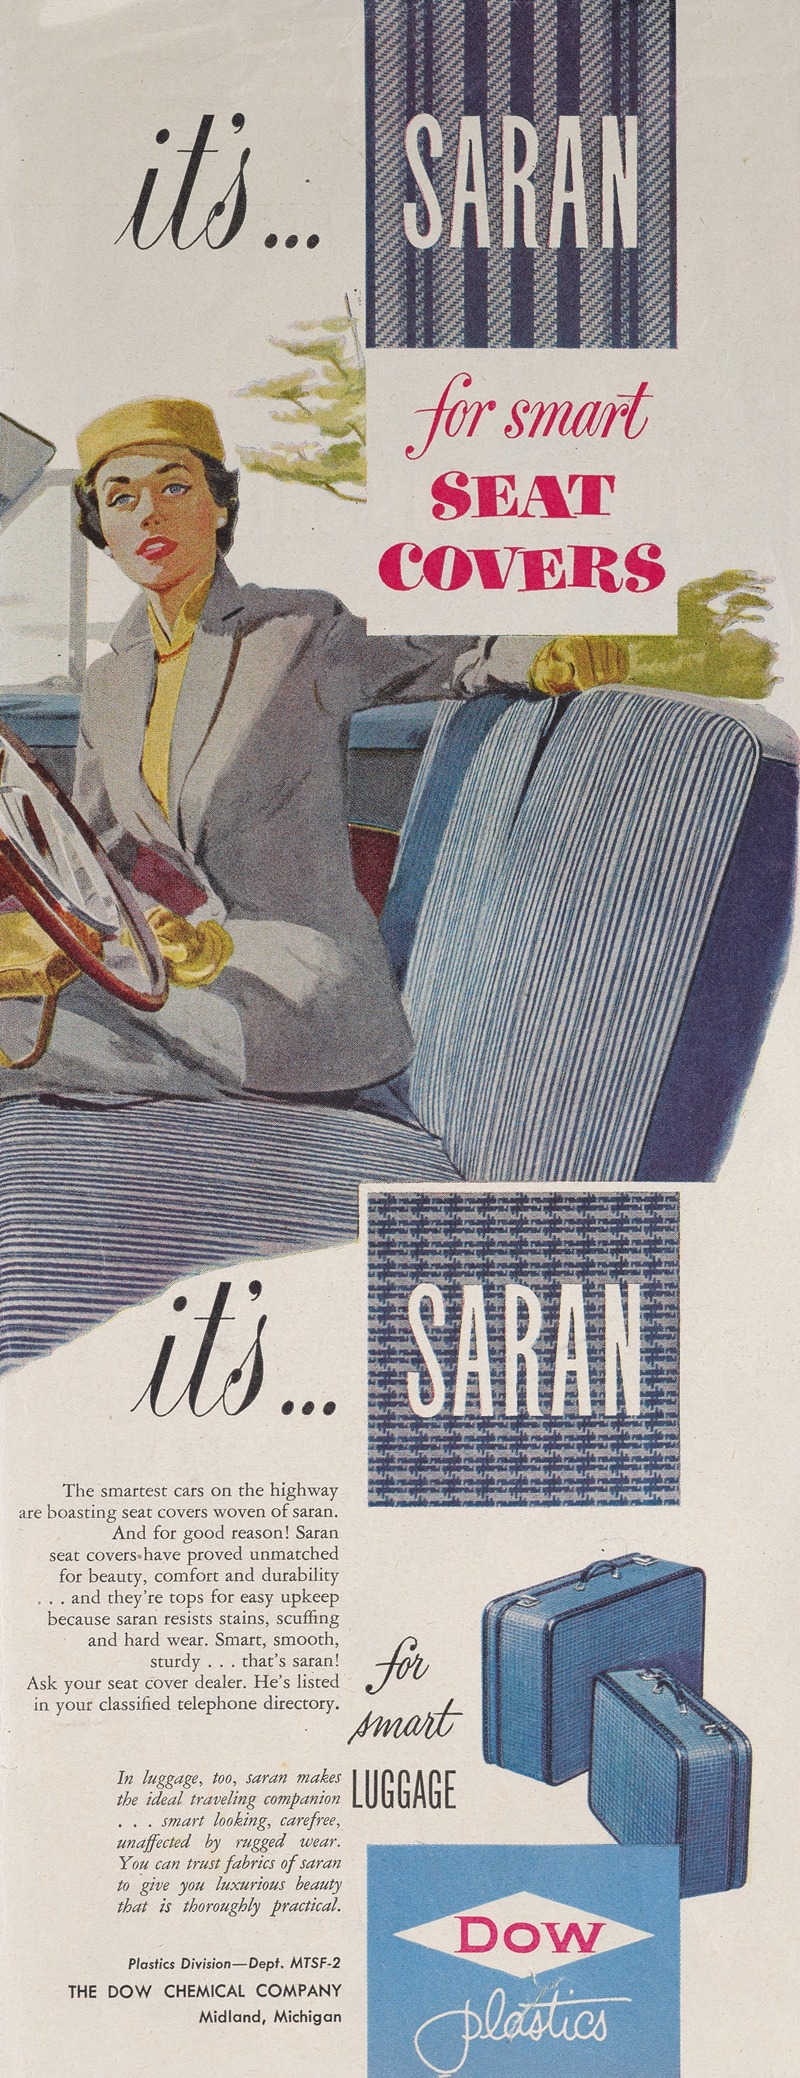 Dow Chemical Company - It’s…SARAN for Smart Seat Covers…It’s…SARAN for Smart Luggage